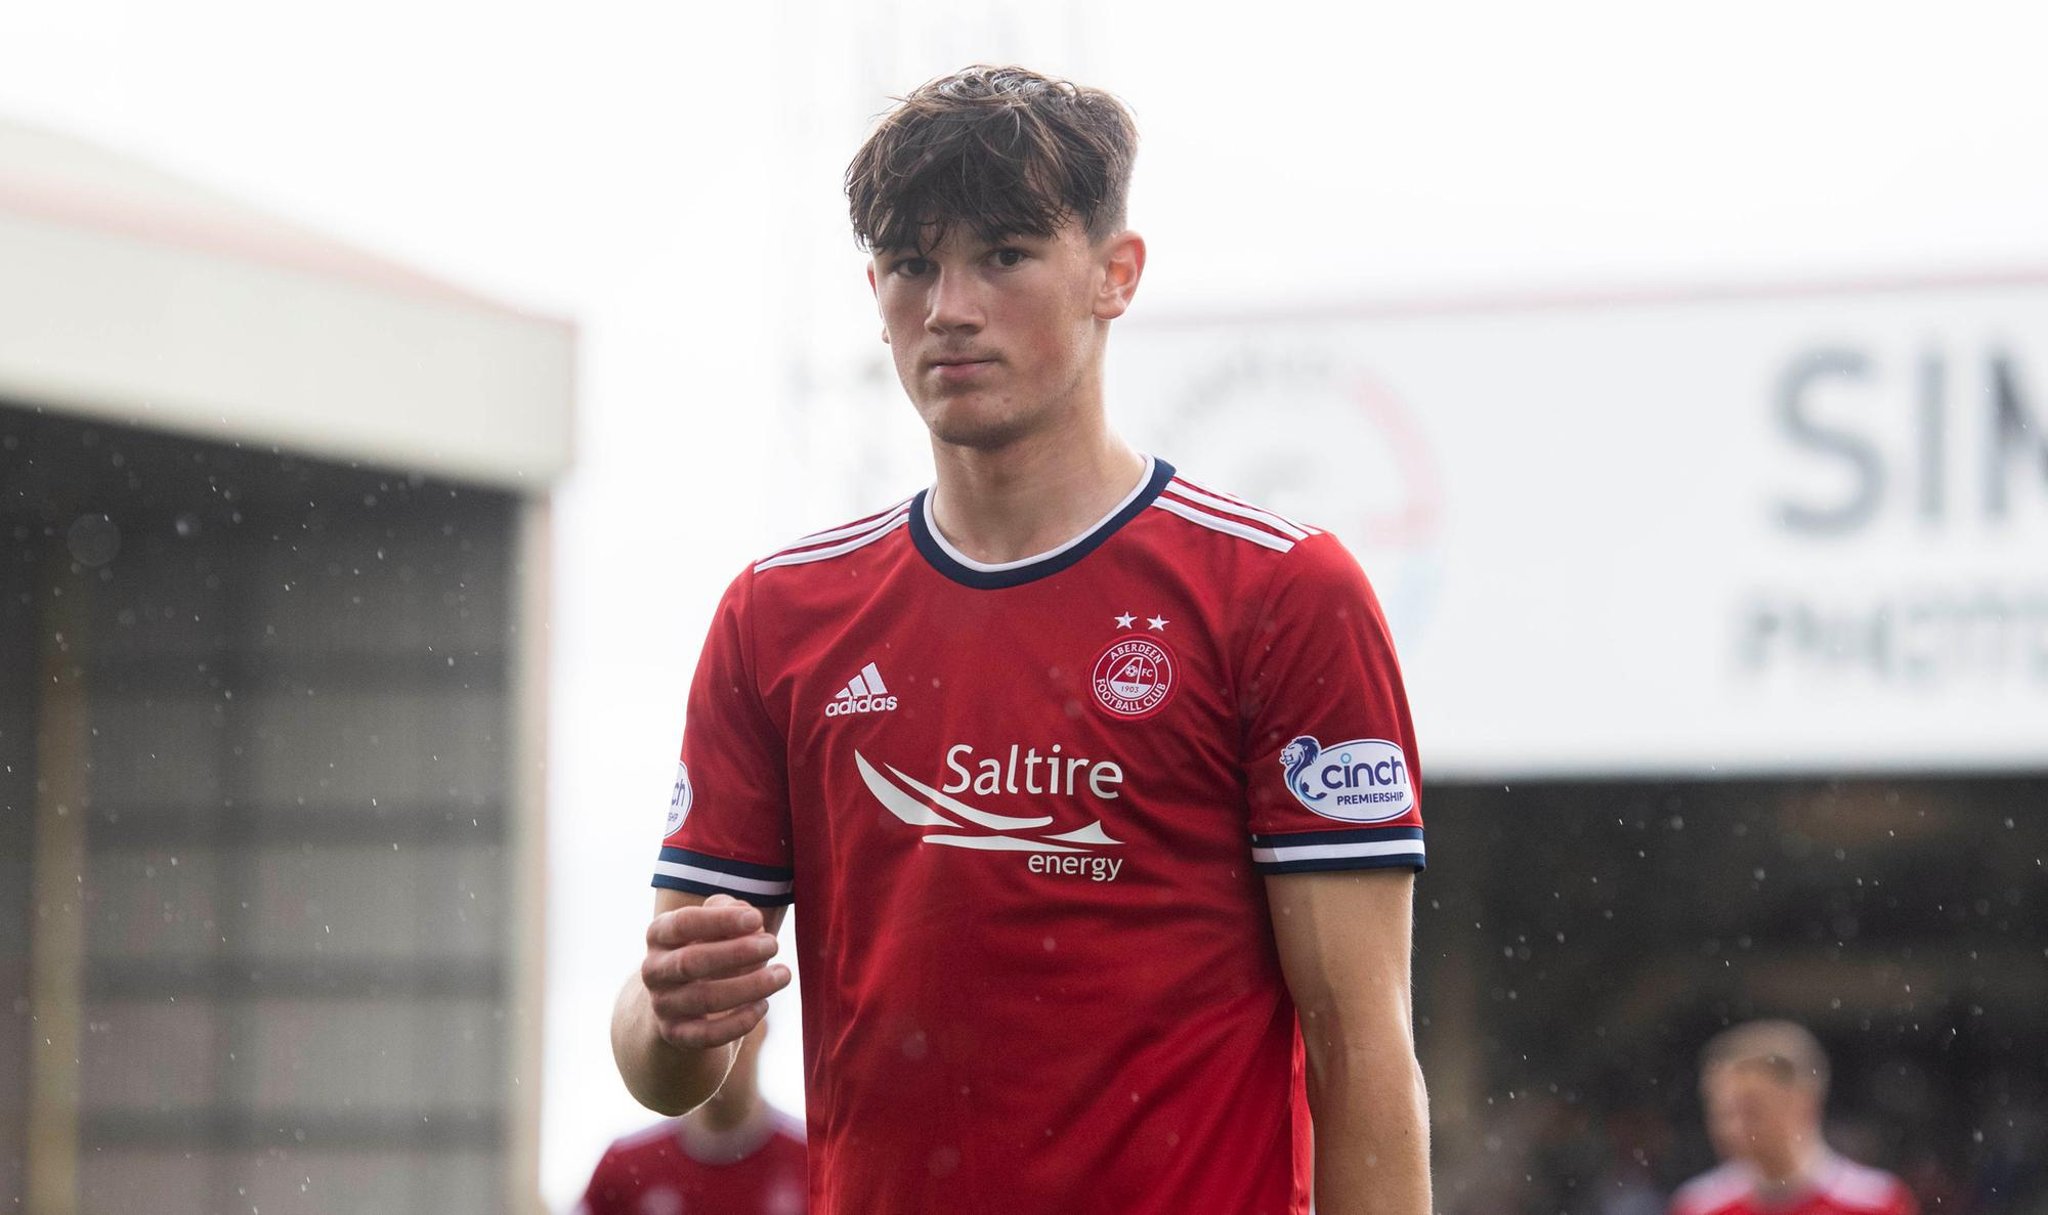 Liverpool sign Aberdeen starlet Calvin Ramsay in reported £6.5 million deal